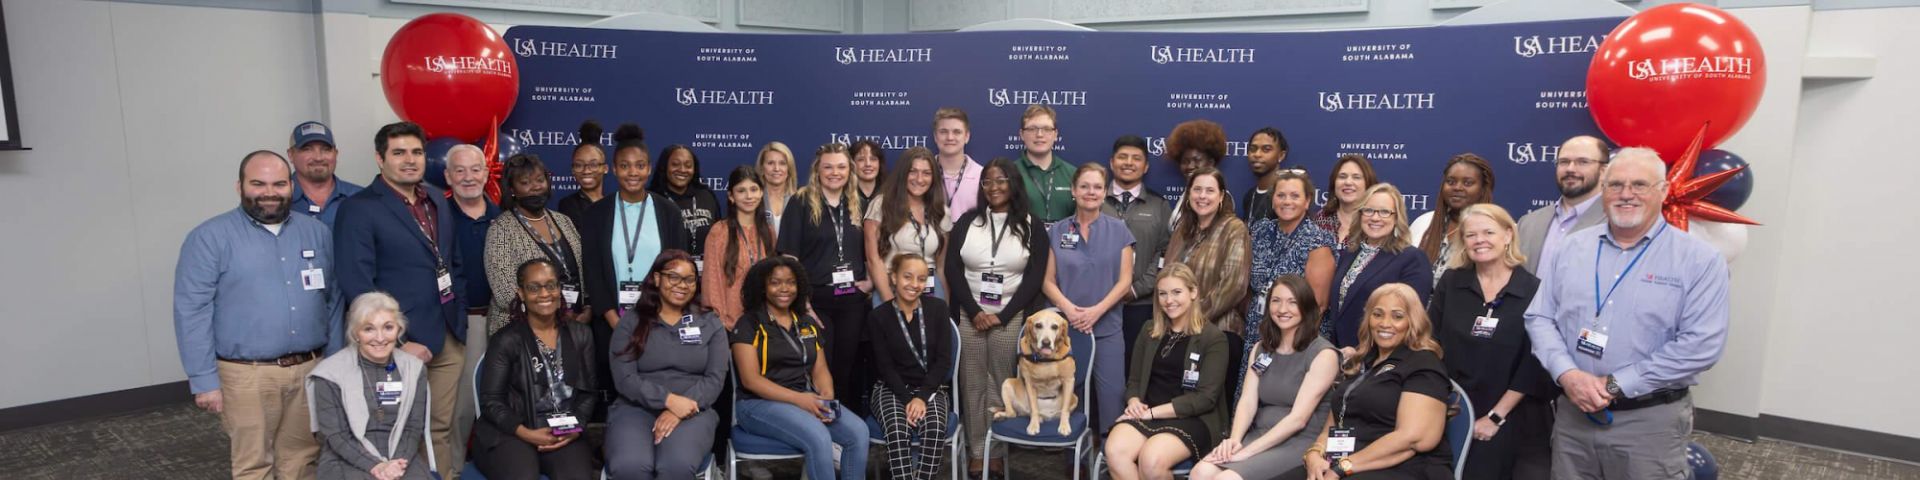 Showcase Mobile brings college students to USA Health